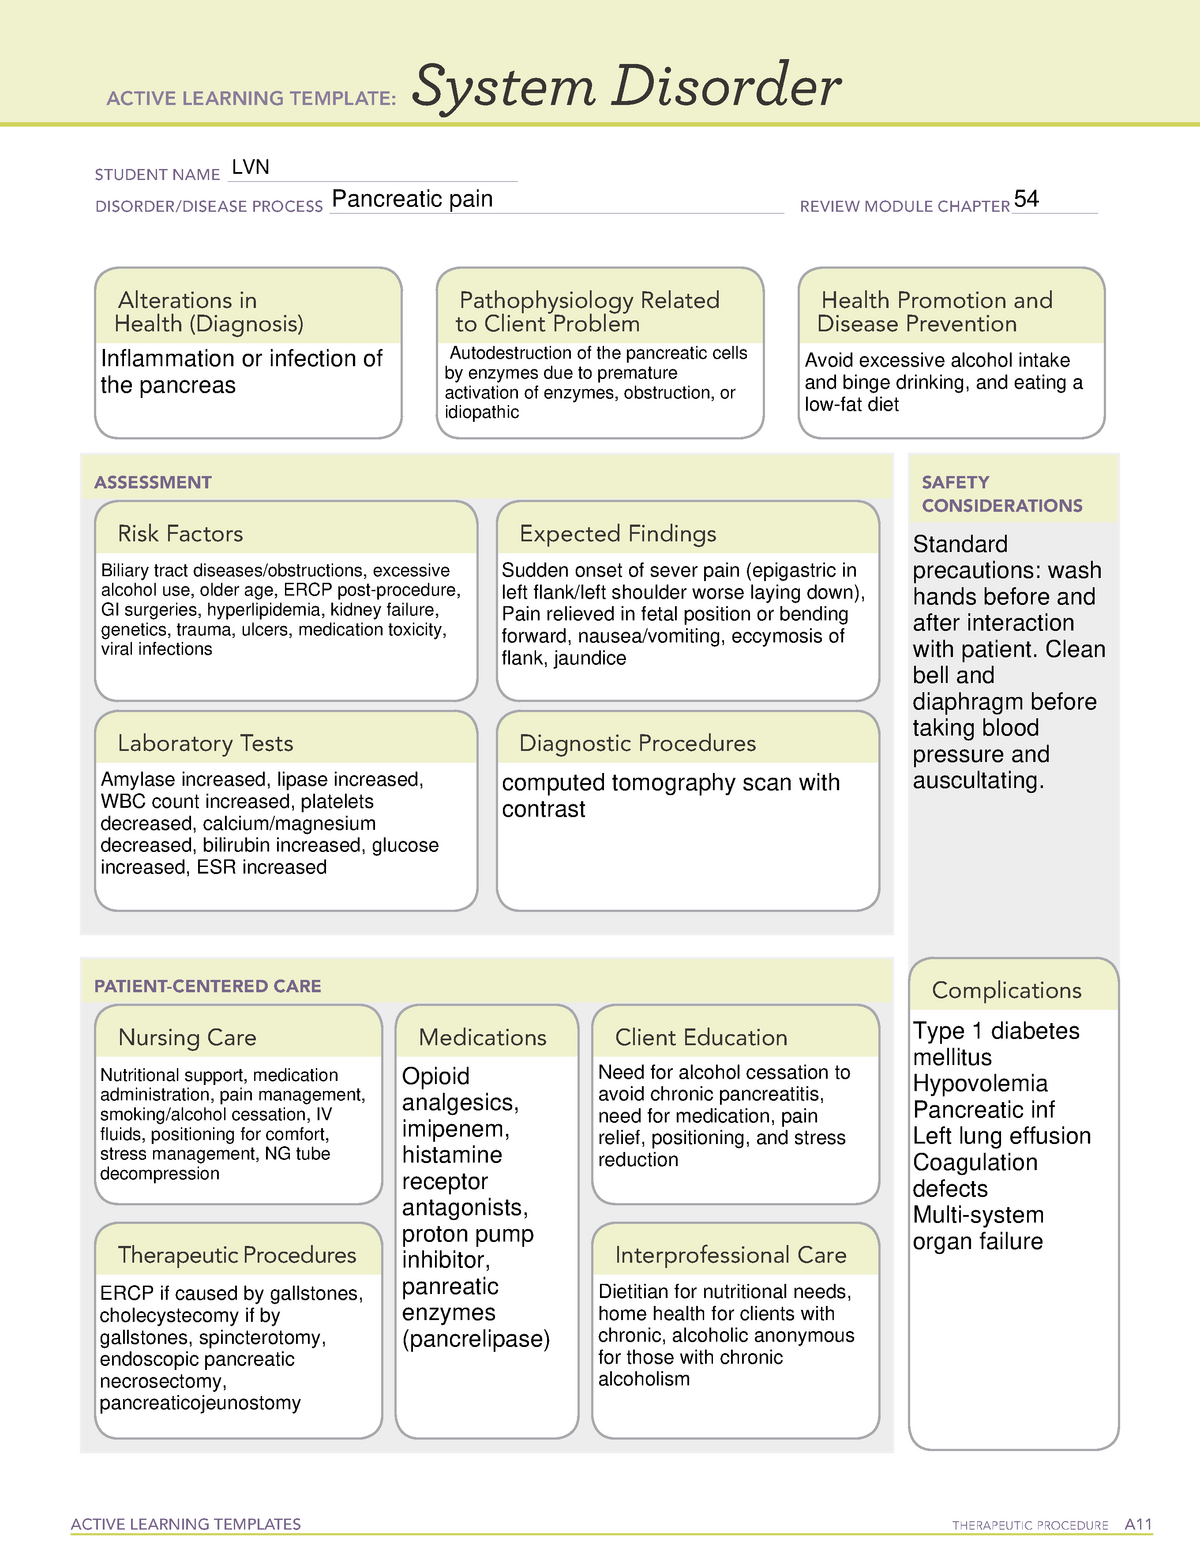 pancreatic-pain-template-active-learning-templates-therapeutic